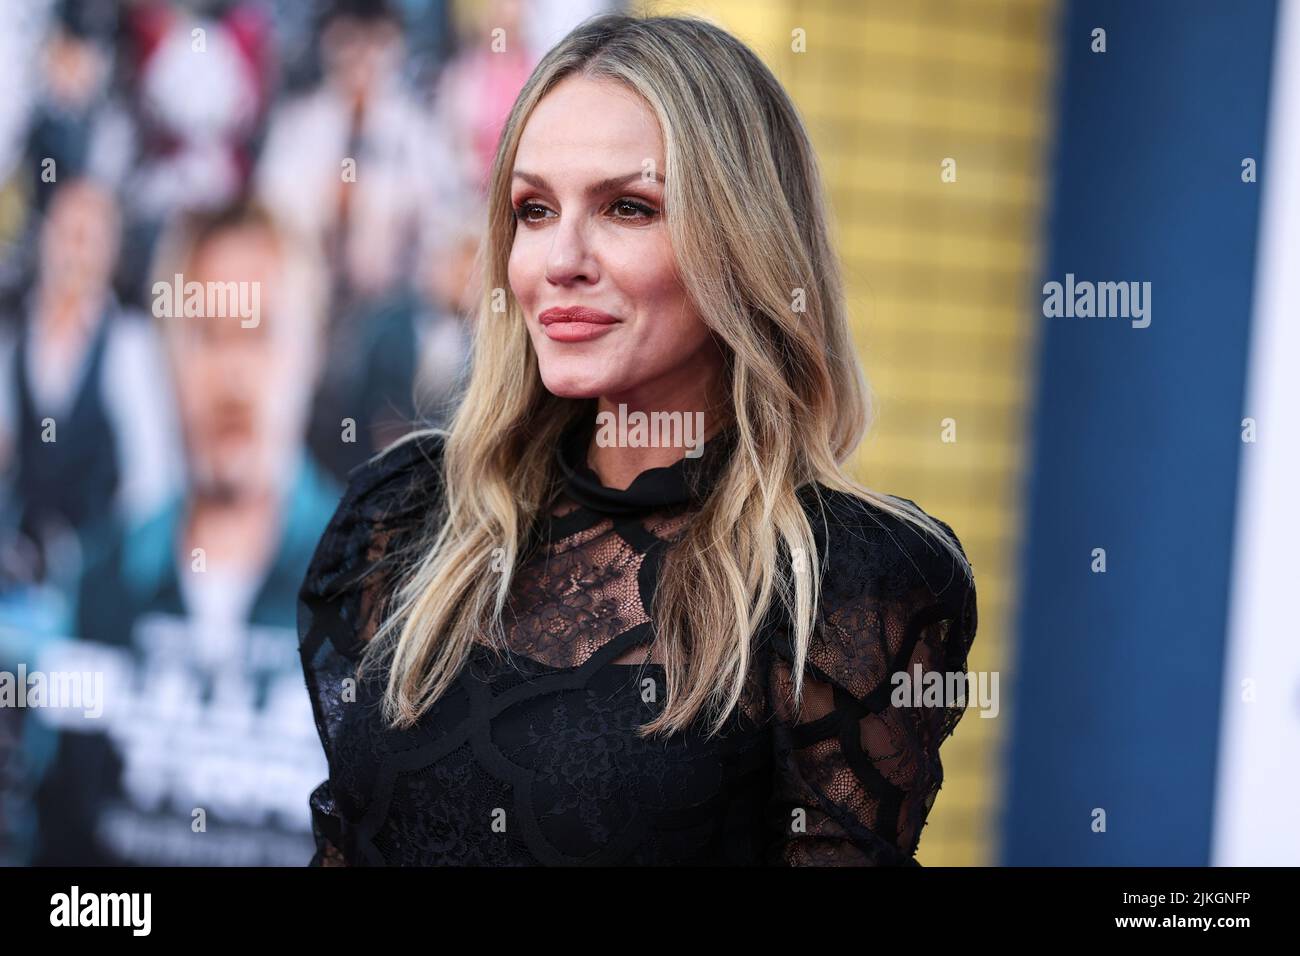 WESTWOOD, LOS ANGELES, CALIFORNIA, USA - AUGUST 01: Monet Mazur arrives at the Los Angeles Premiere Of Sony Pictures' 'Bullet Train' held at the Regency Village Theatre on August 1, 2022 in Westwood, Los Angeles, California, United States. (Photo by Xavier Collin/Image Press Agency) Stock Photo